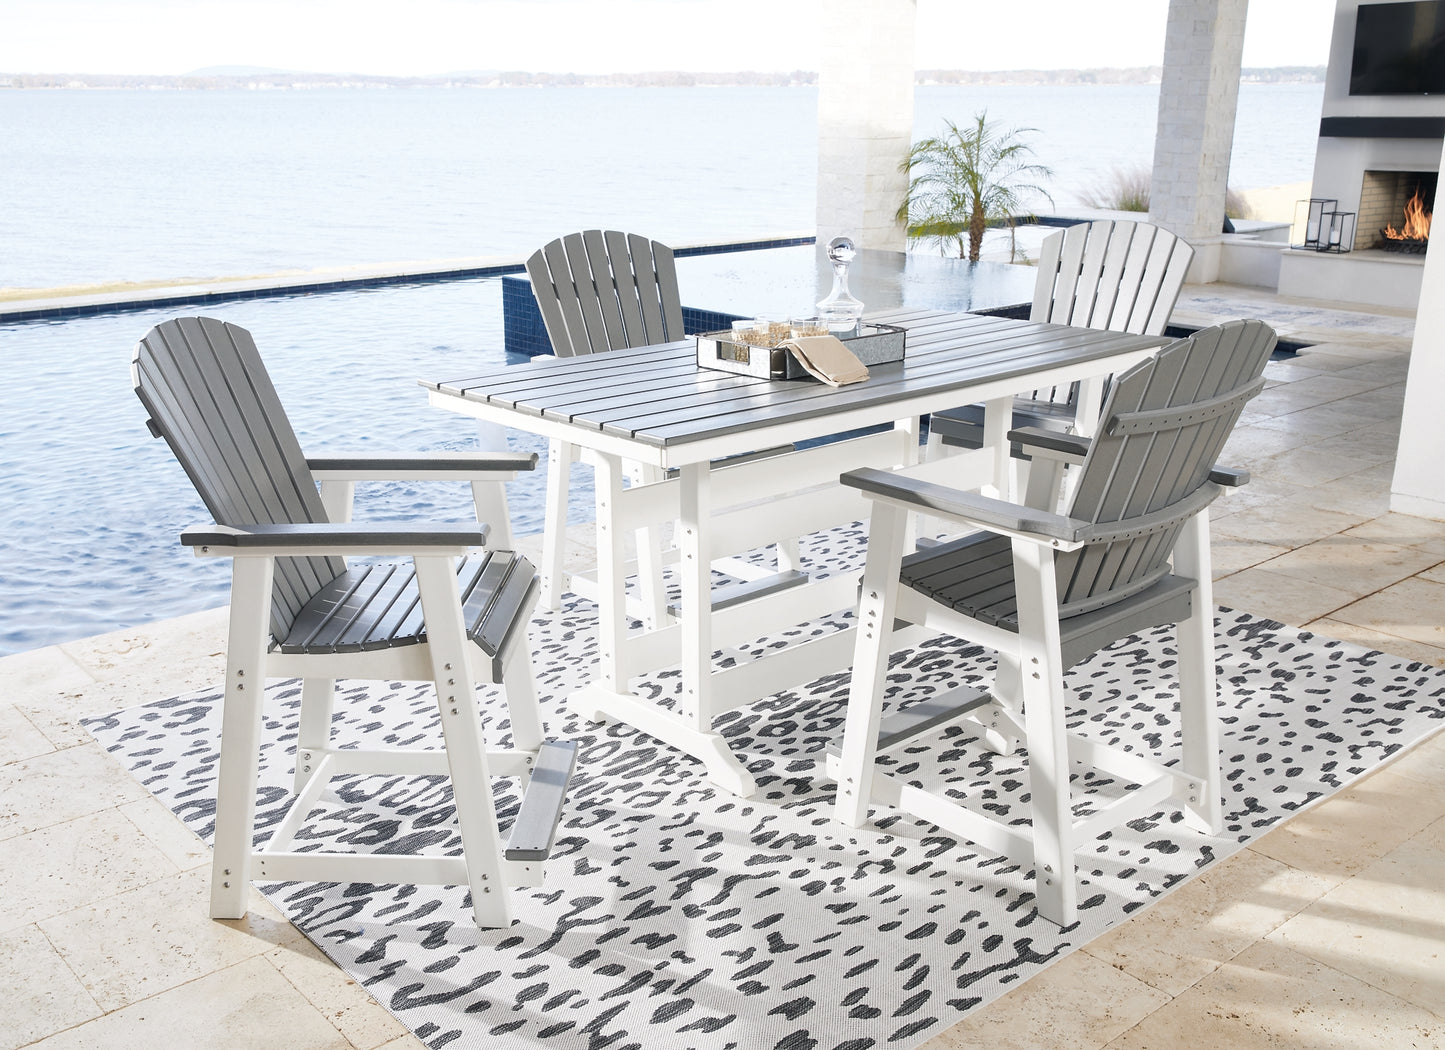 Transville Outdoor Counter Height Dining Table and 4 Barstools